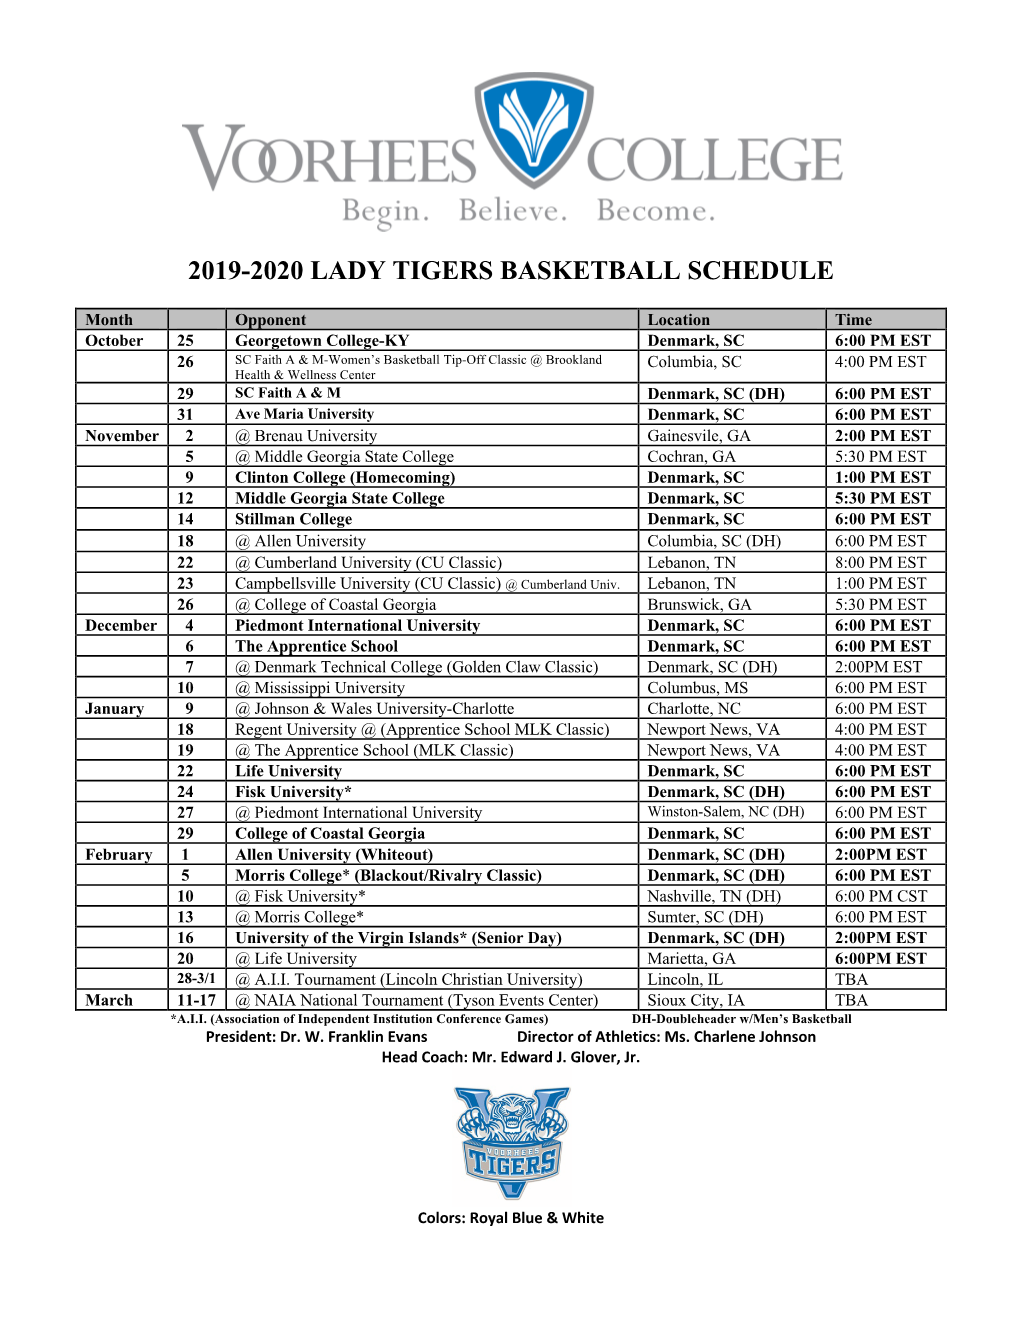 2019-2020 Lady Tigers Basketball Schedule